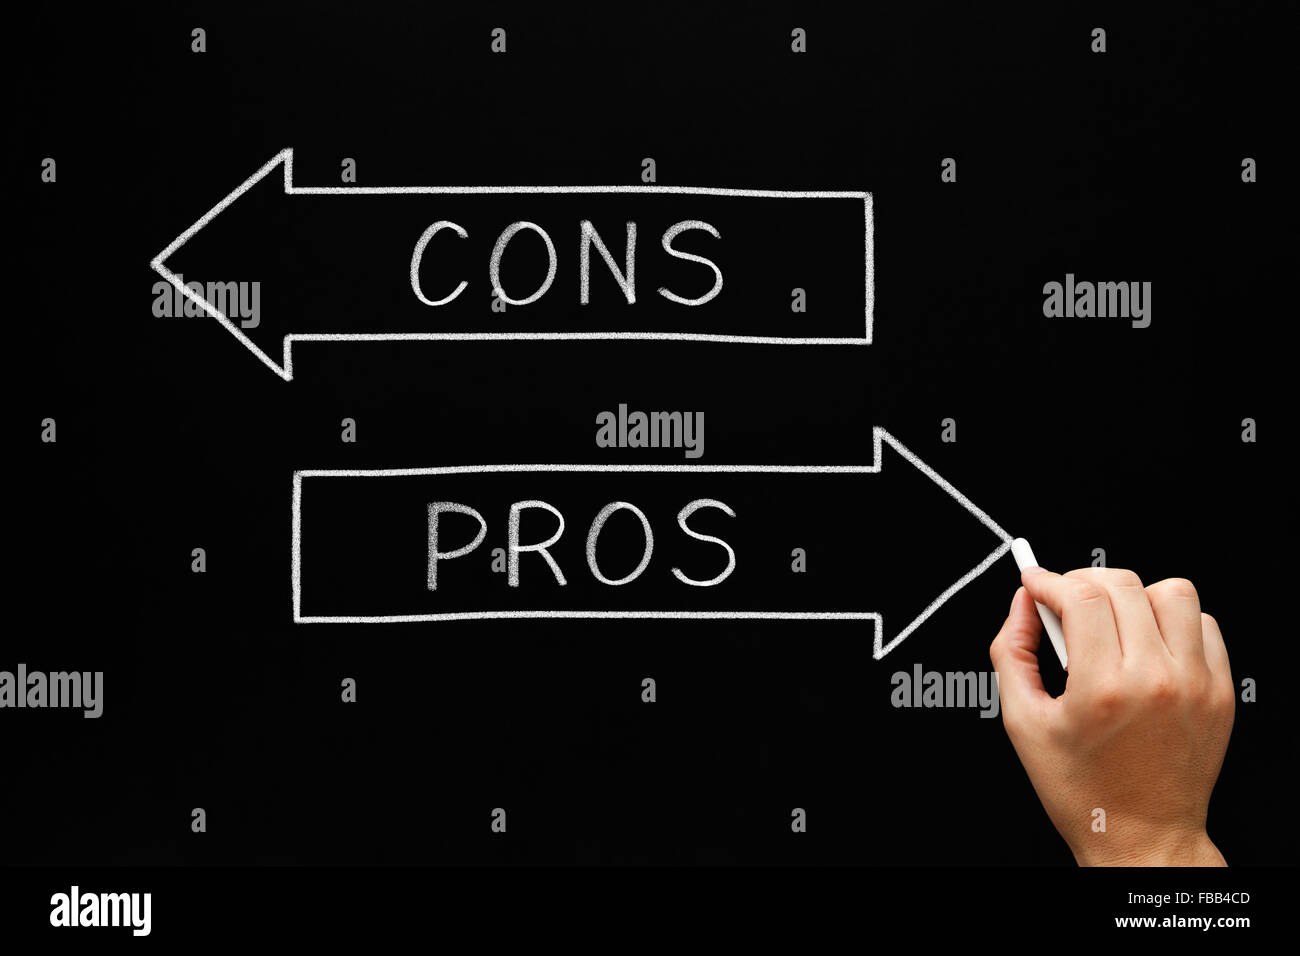 Hand sketching Pros Cons arrows concept with white chalk on a blackboard. Stock Photo